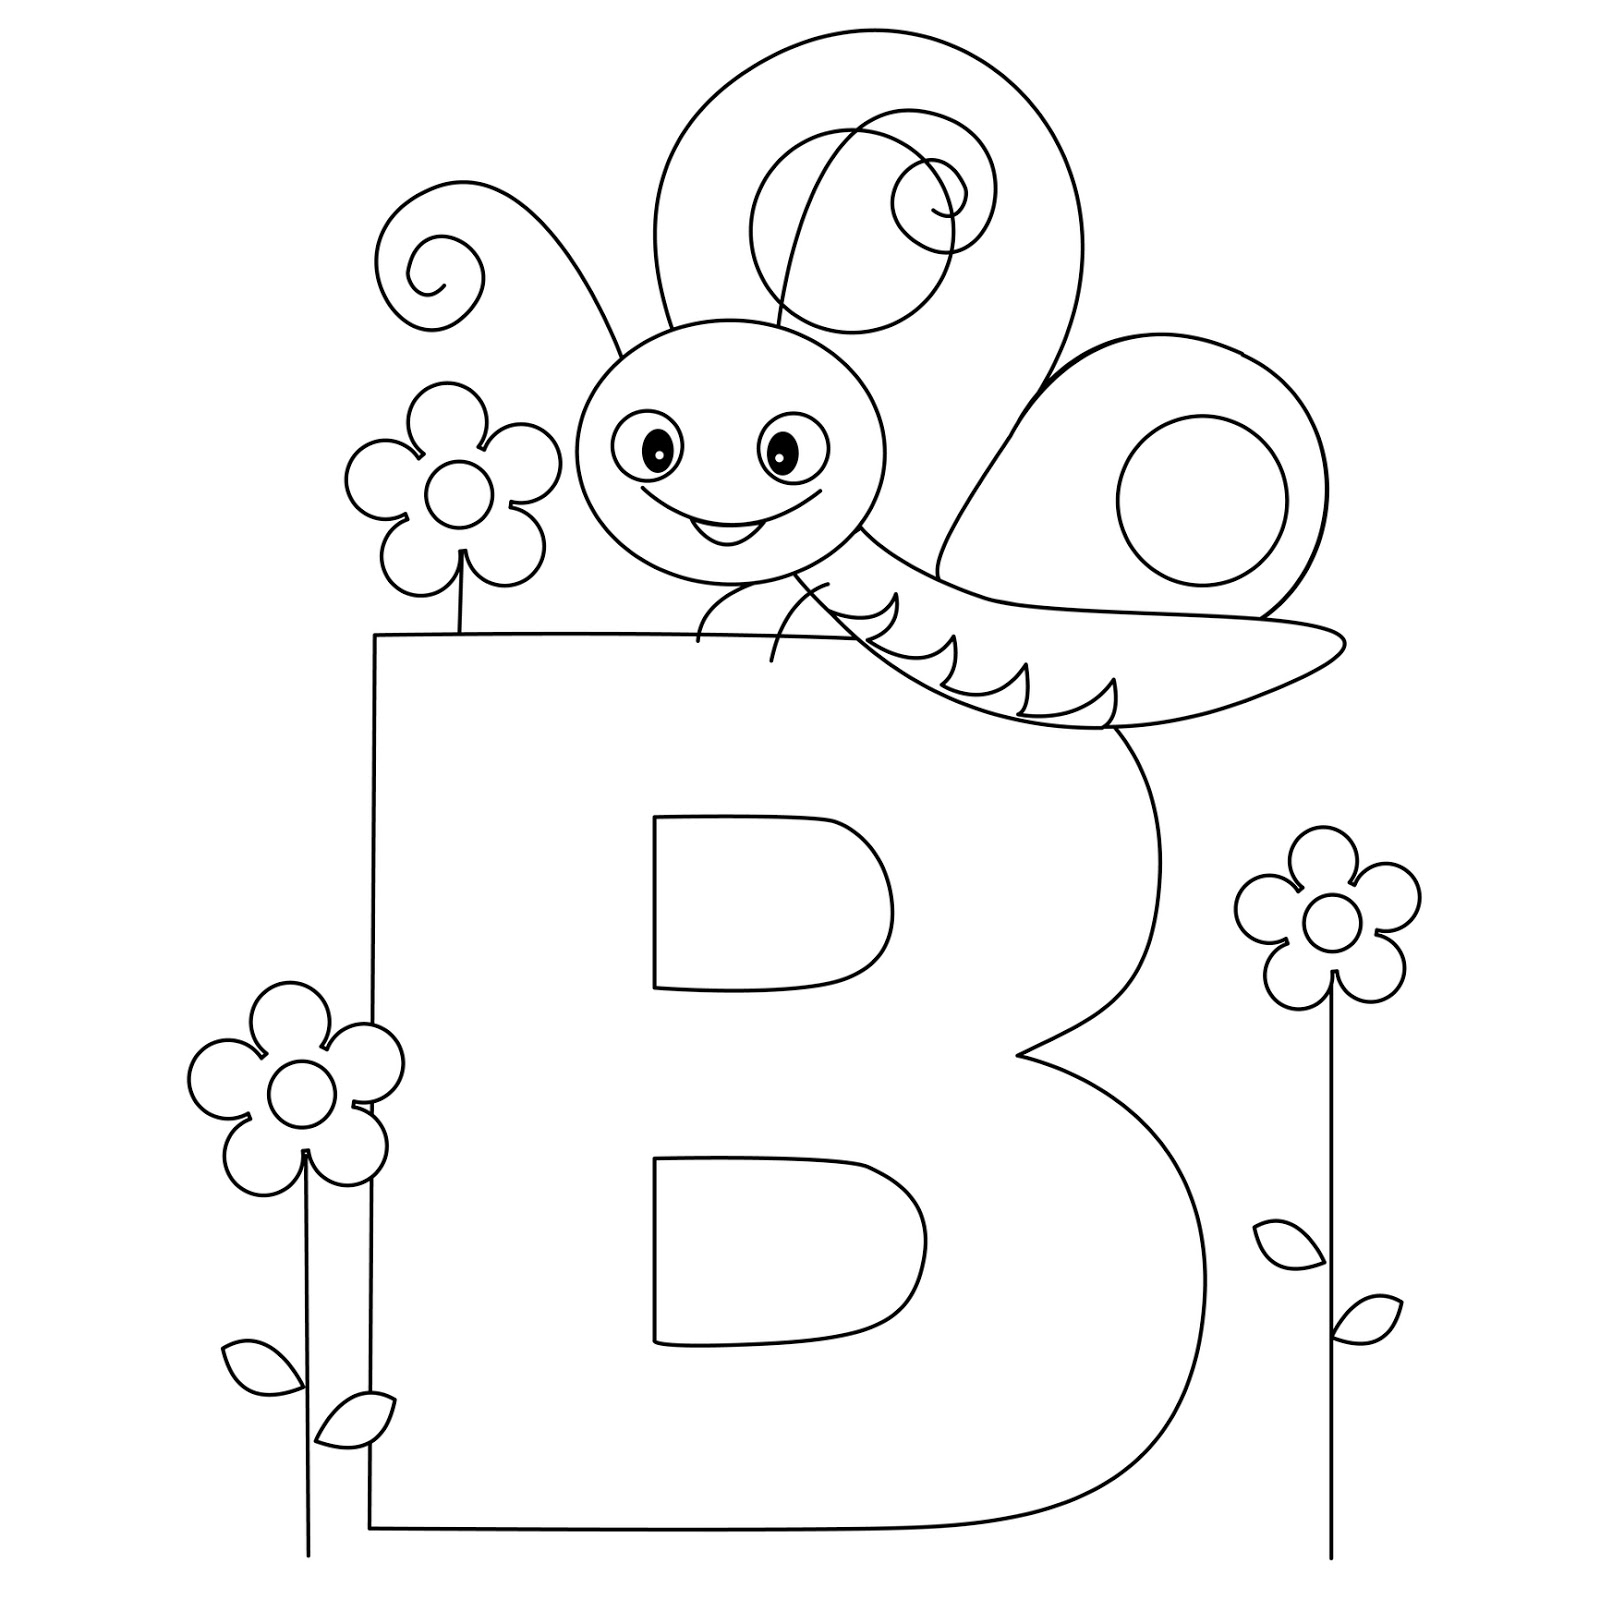 Coloring page: Alphabet (Educational) #124588 - Free Printable Coloring Pages